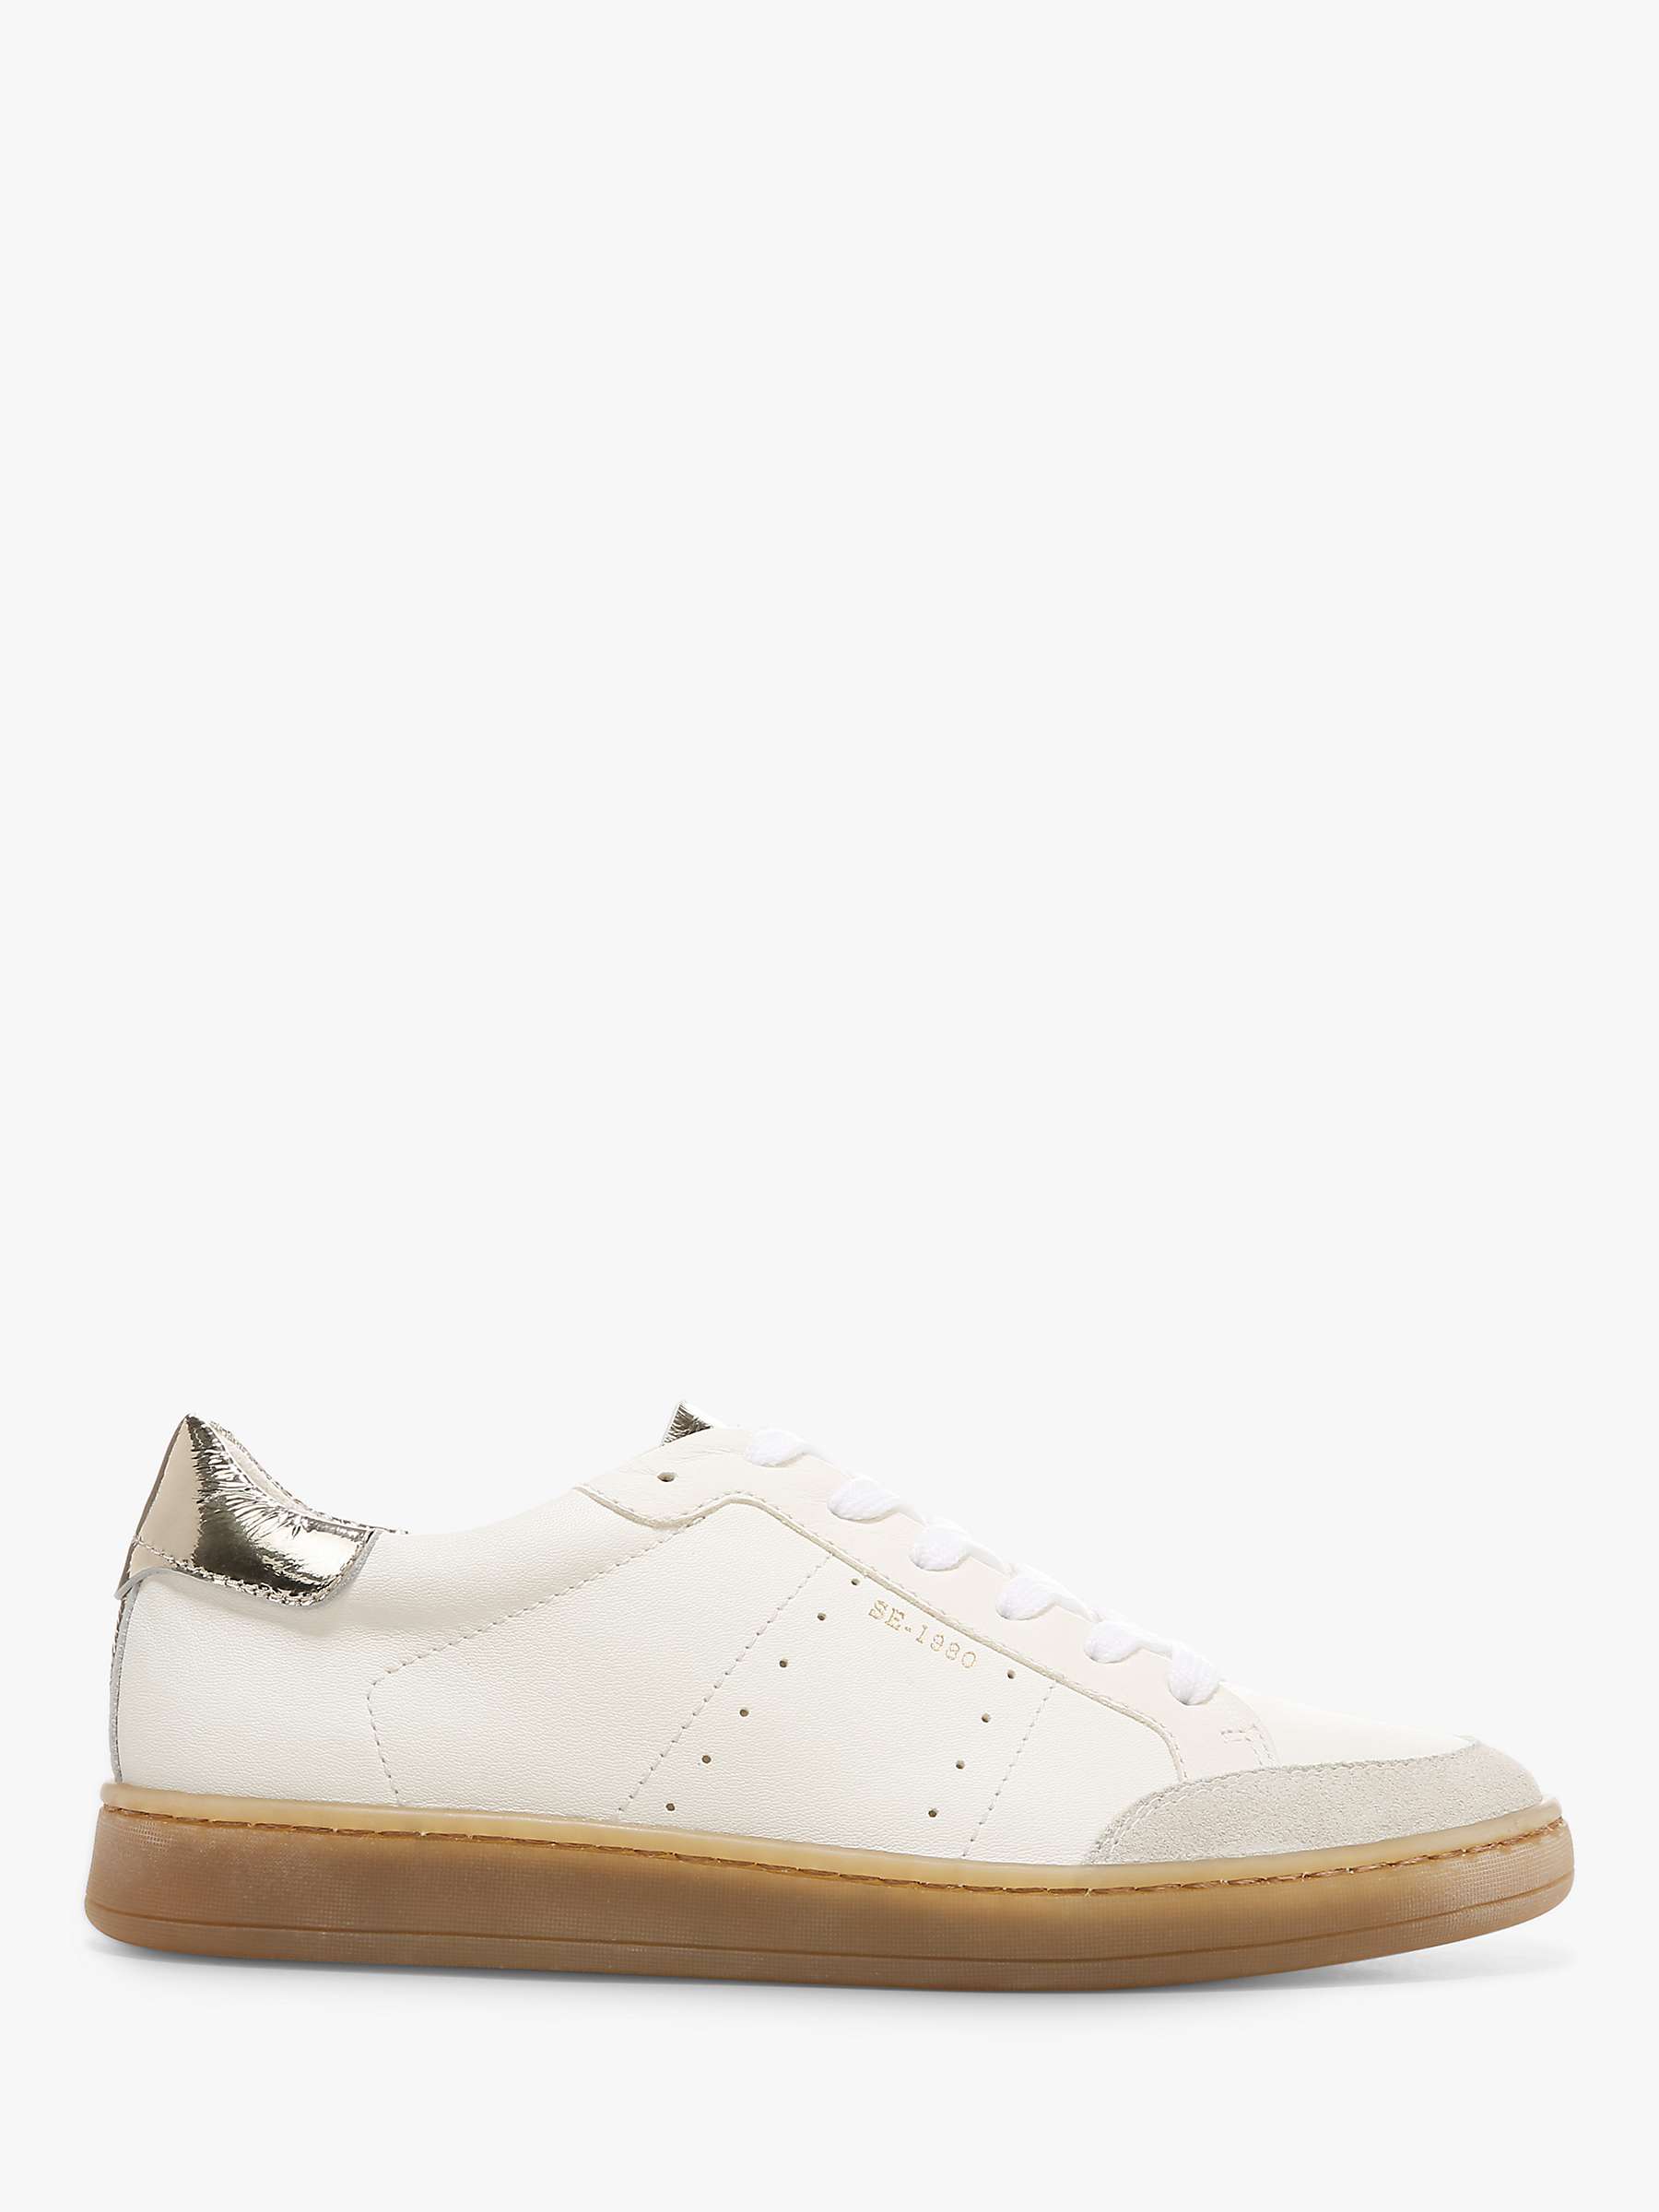 Buy Sam Edelman Josi Leather Lace Up Trainers Online at johnlewis.com